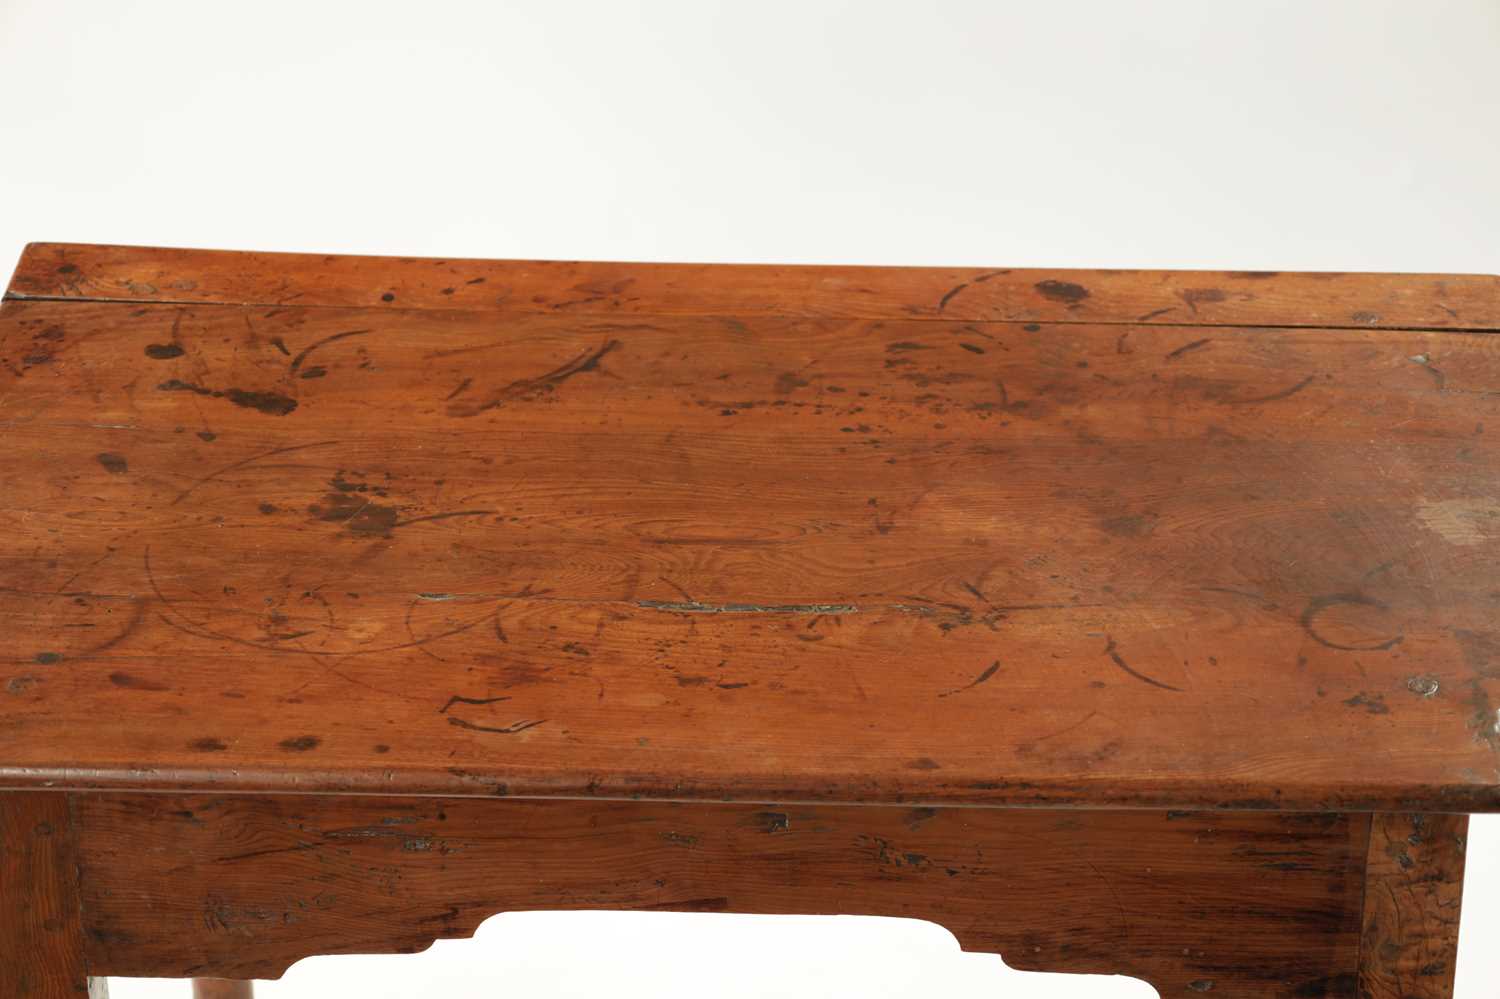 AN EARLY 18TH CENTURY YEW WOOD SIDE TABLE - Image 3 of 7